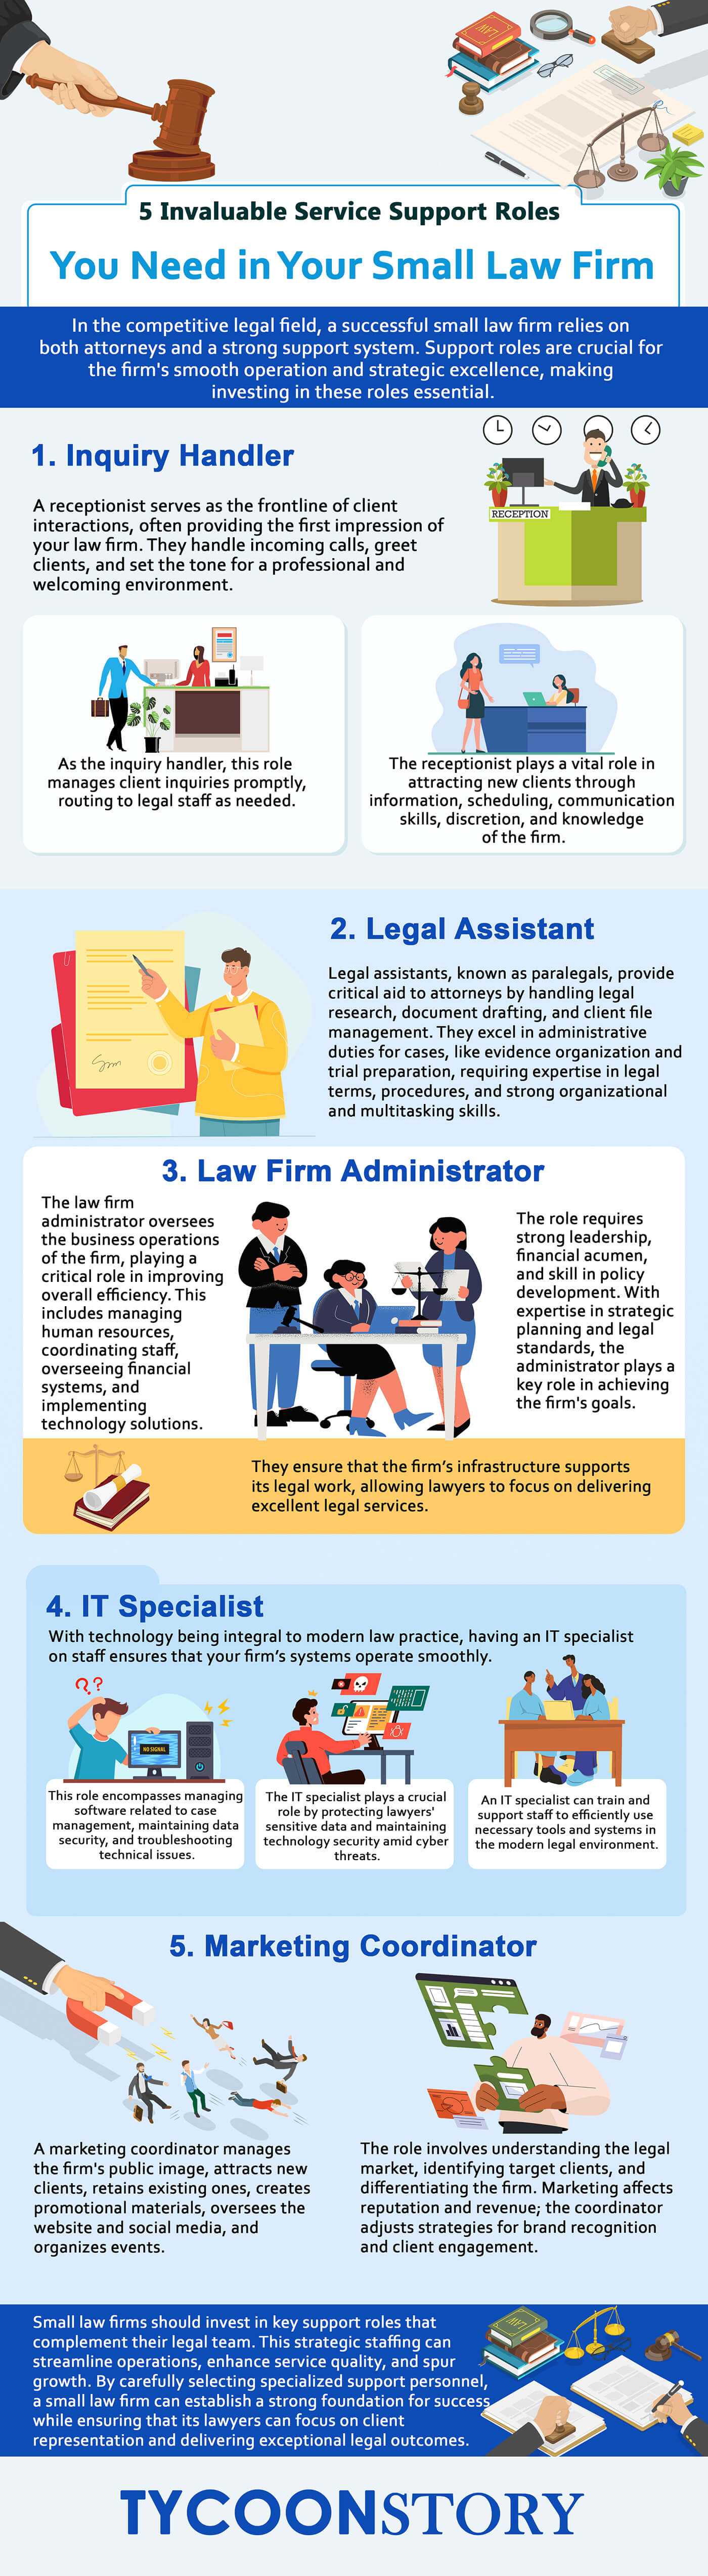 5 invaluable service support roles you need in your small law firm